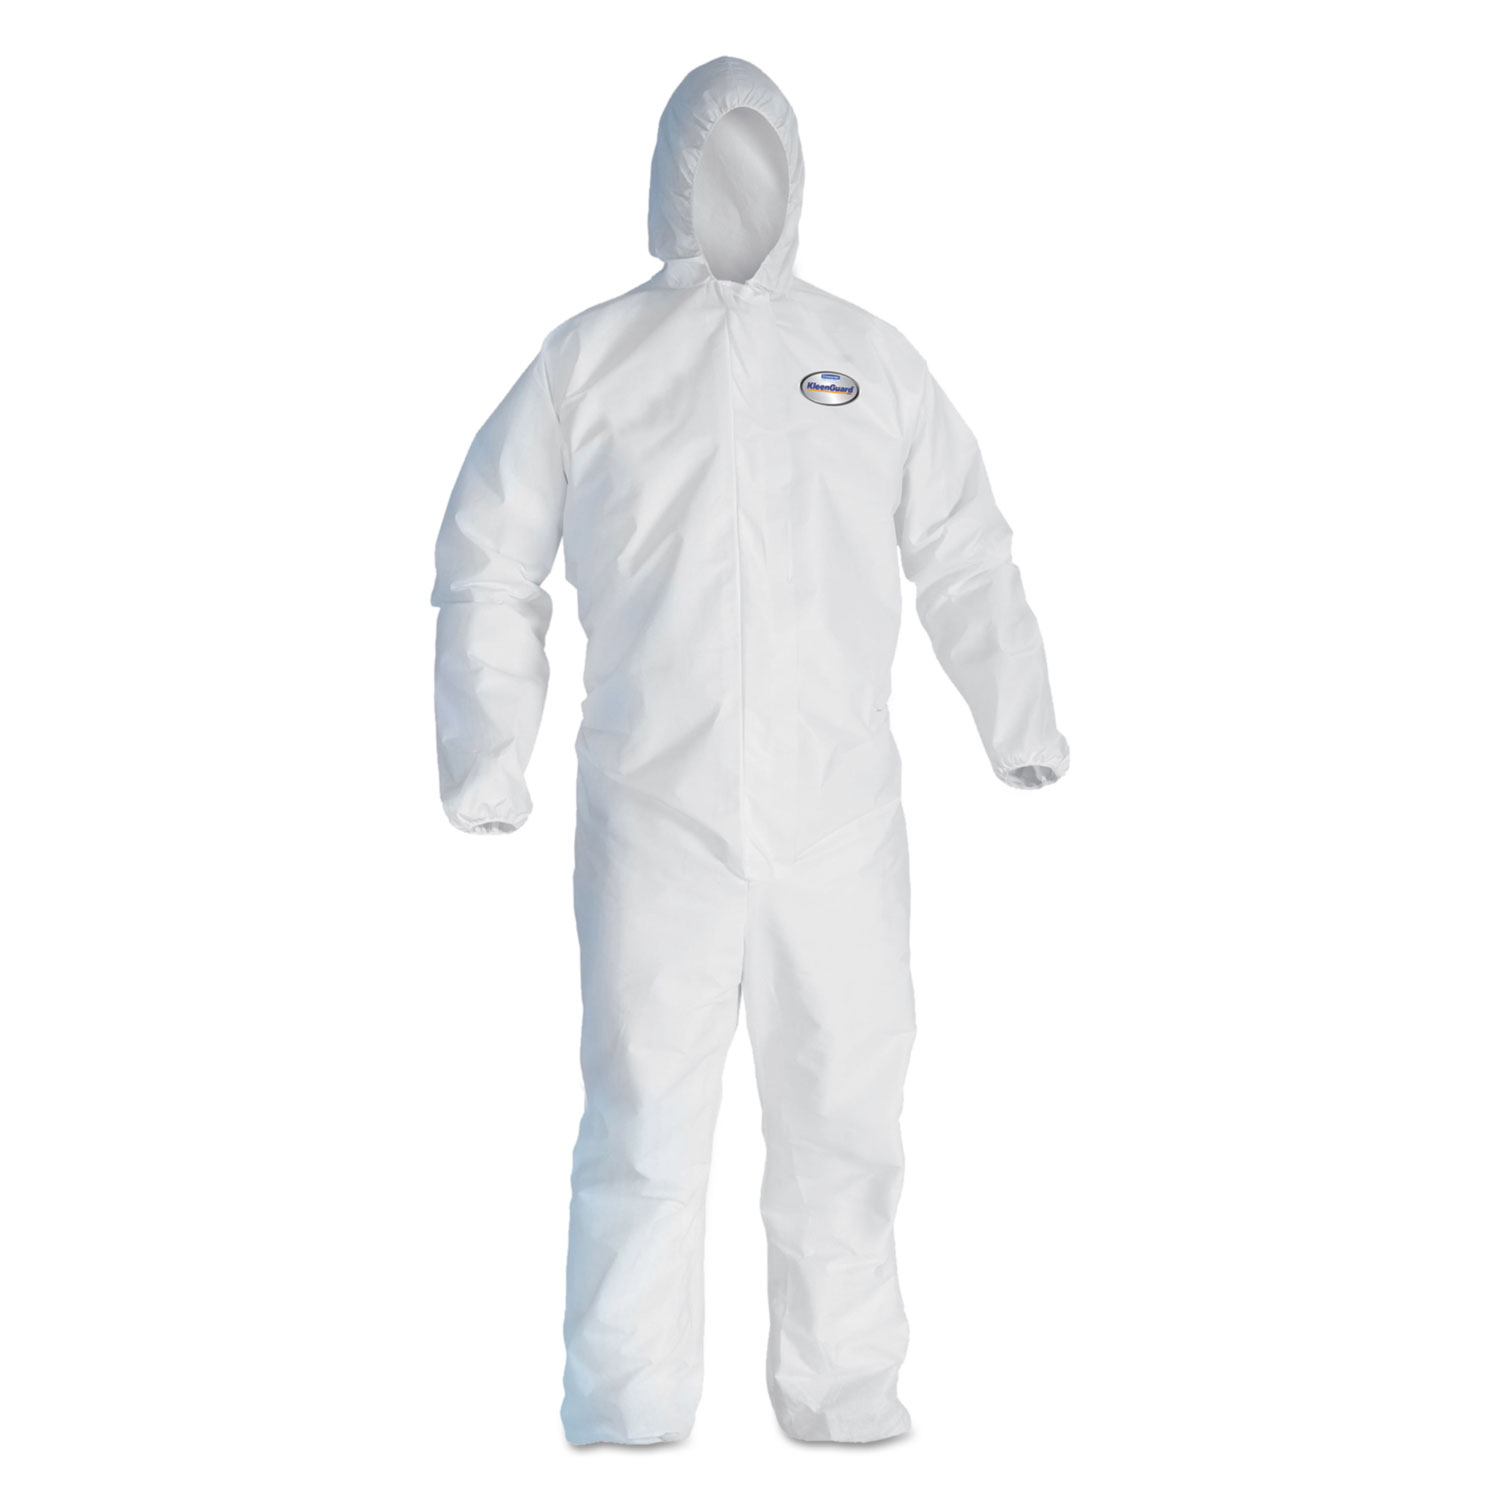 A20 Elastic Back, Cuff and Ankles Hooded Coveralls, 4X-Large, White, 20/Carton